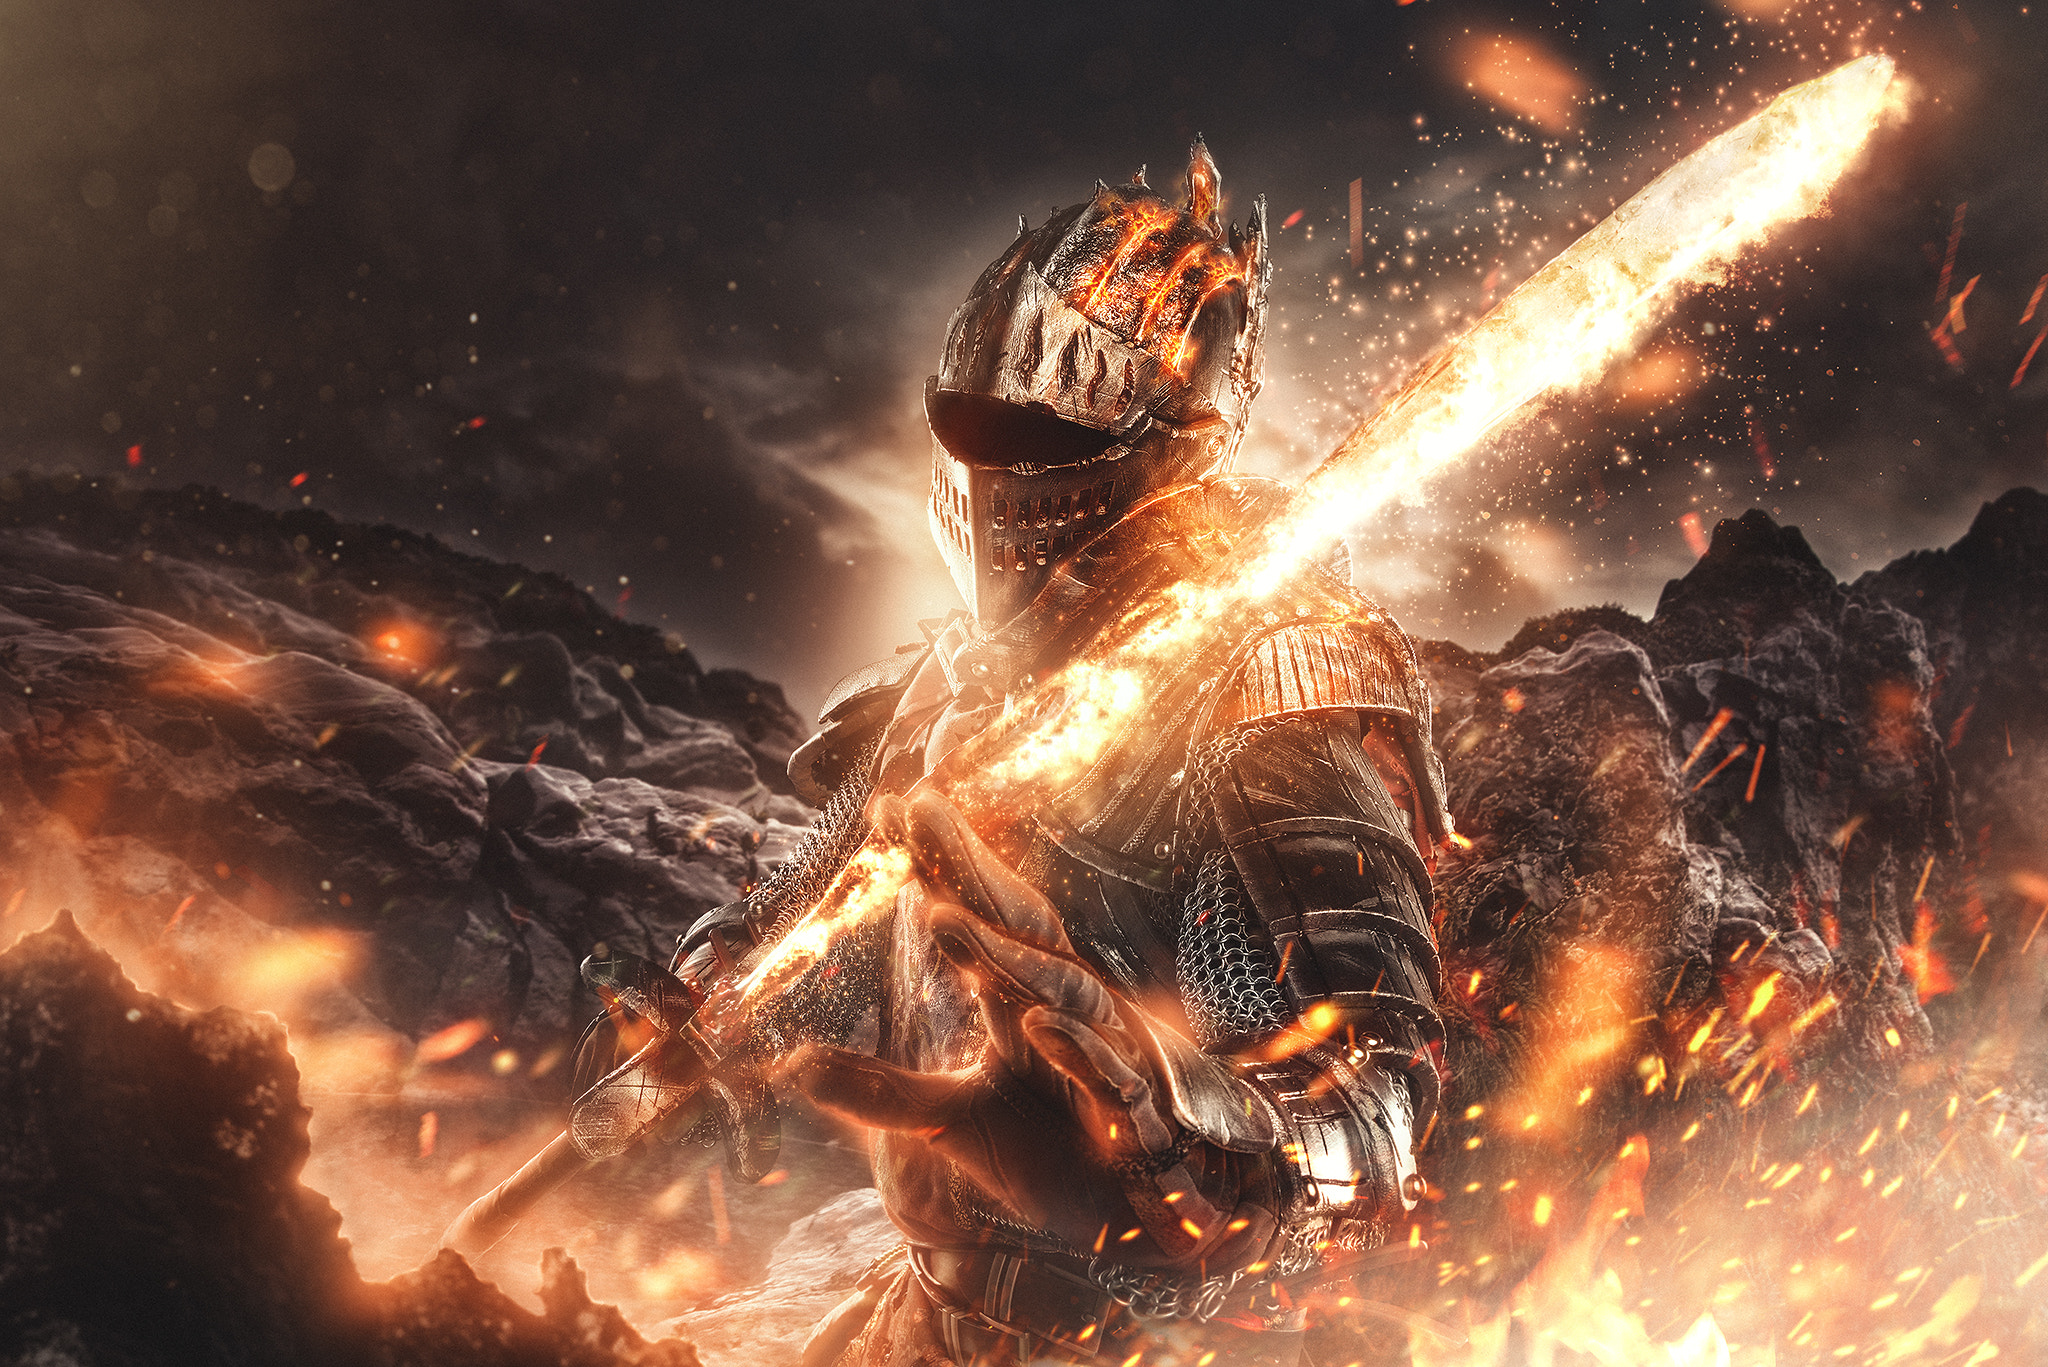 General 2048x1367 Rebeca Saray fantasy art digital art 500px Dark Souls Soul of Cinder fire From Software video games video game art sword weapon burning knight